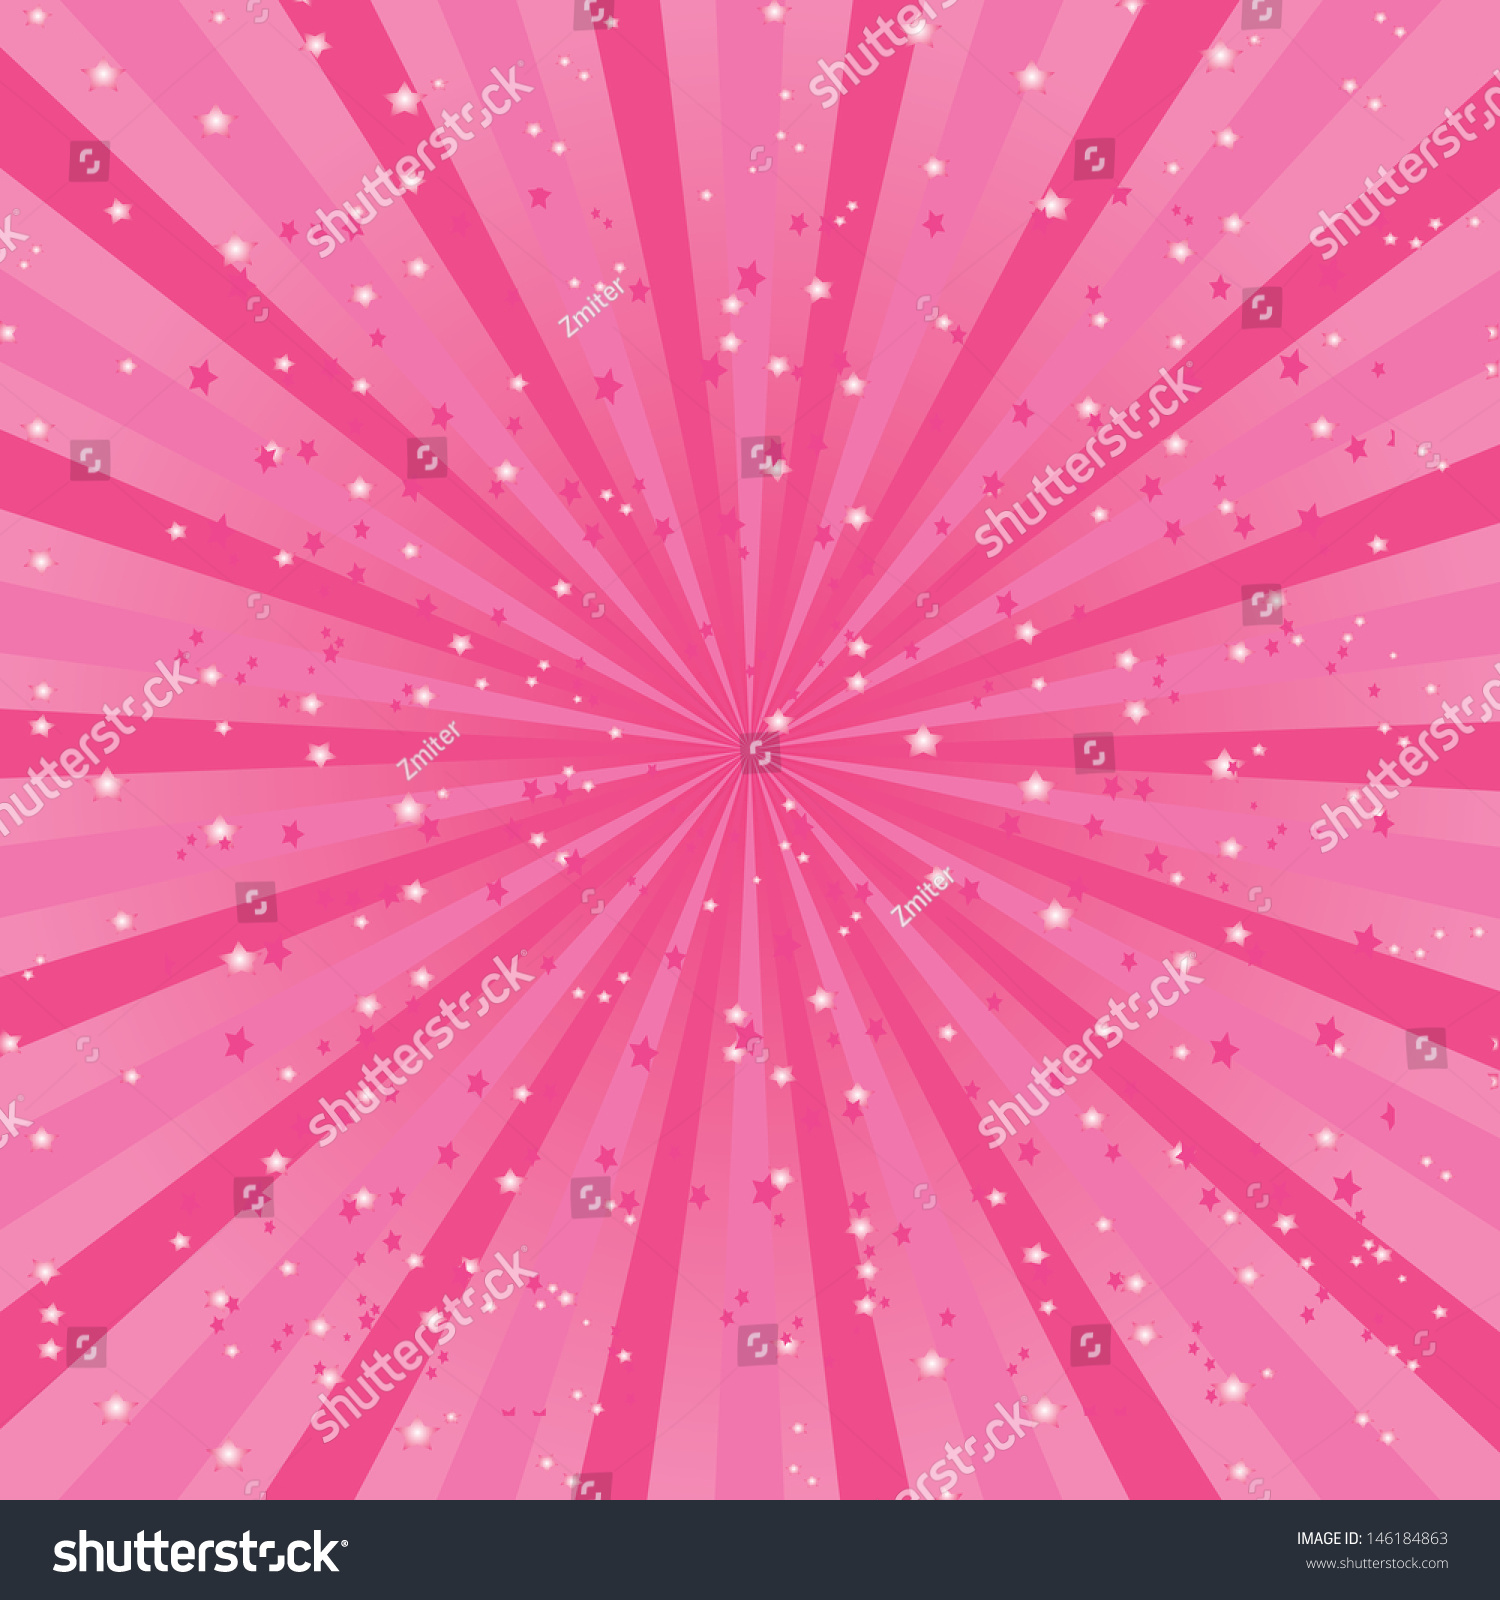 Vector Shiny Background With Ray Of Light And Stars. Pink Abstract ...